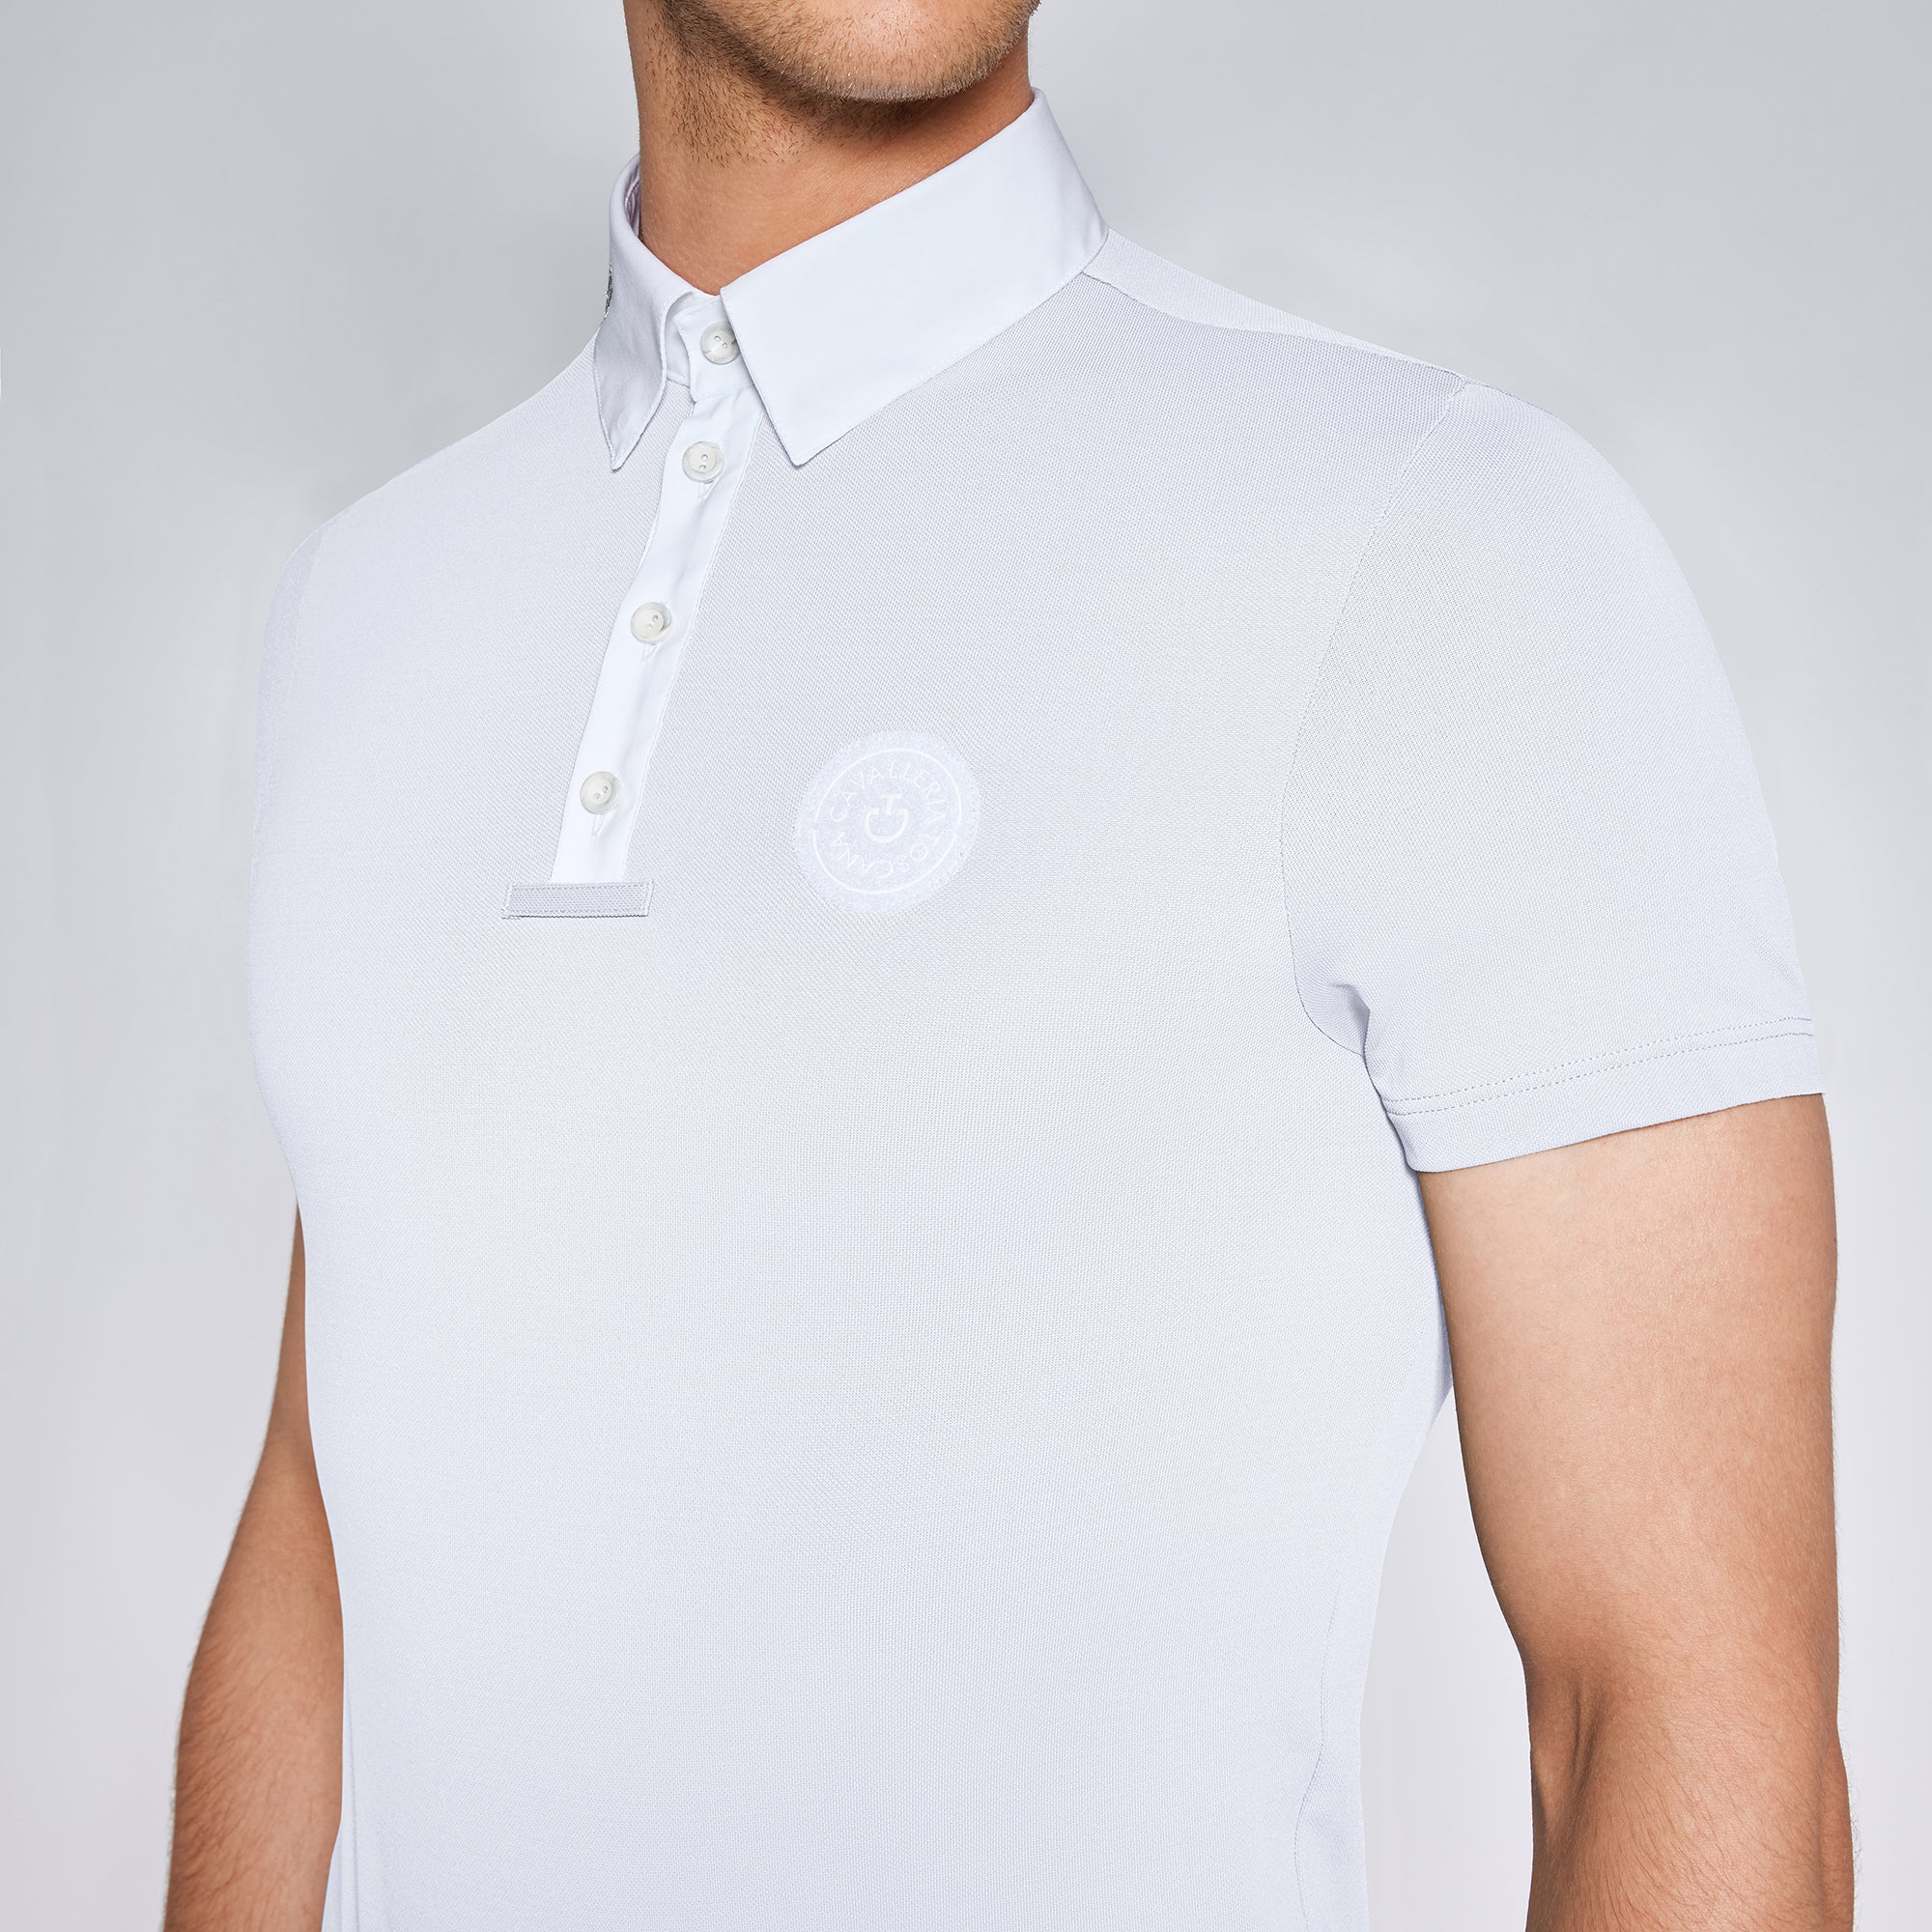 Mens CT Tech S/S Competition Show Shirt - White